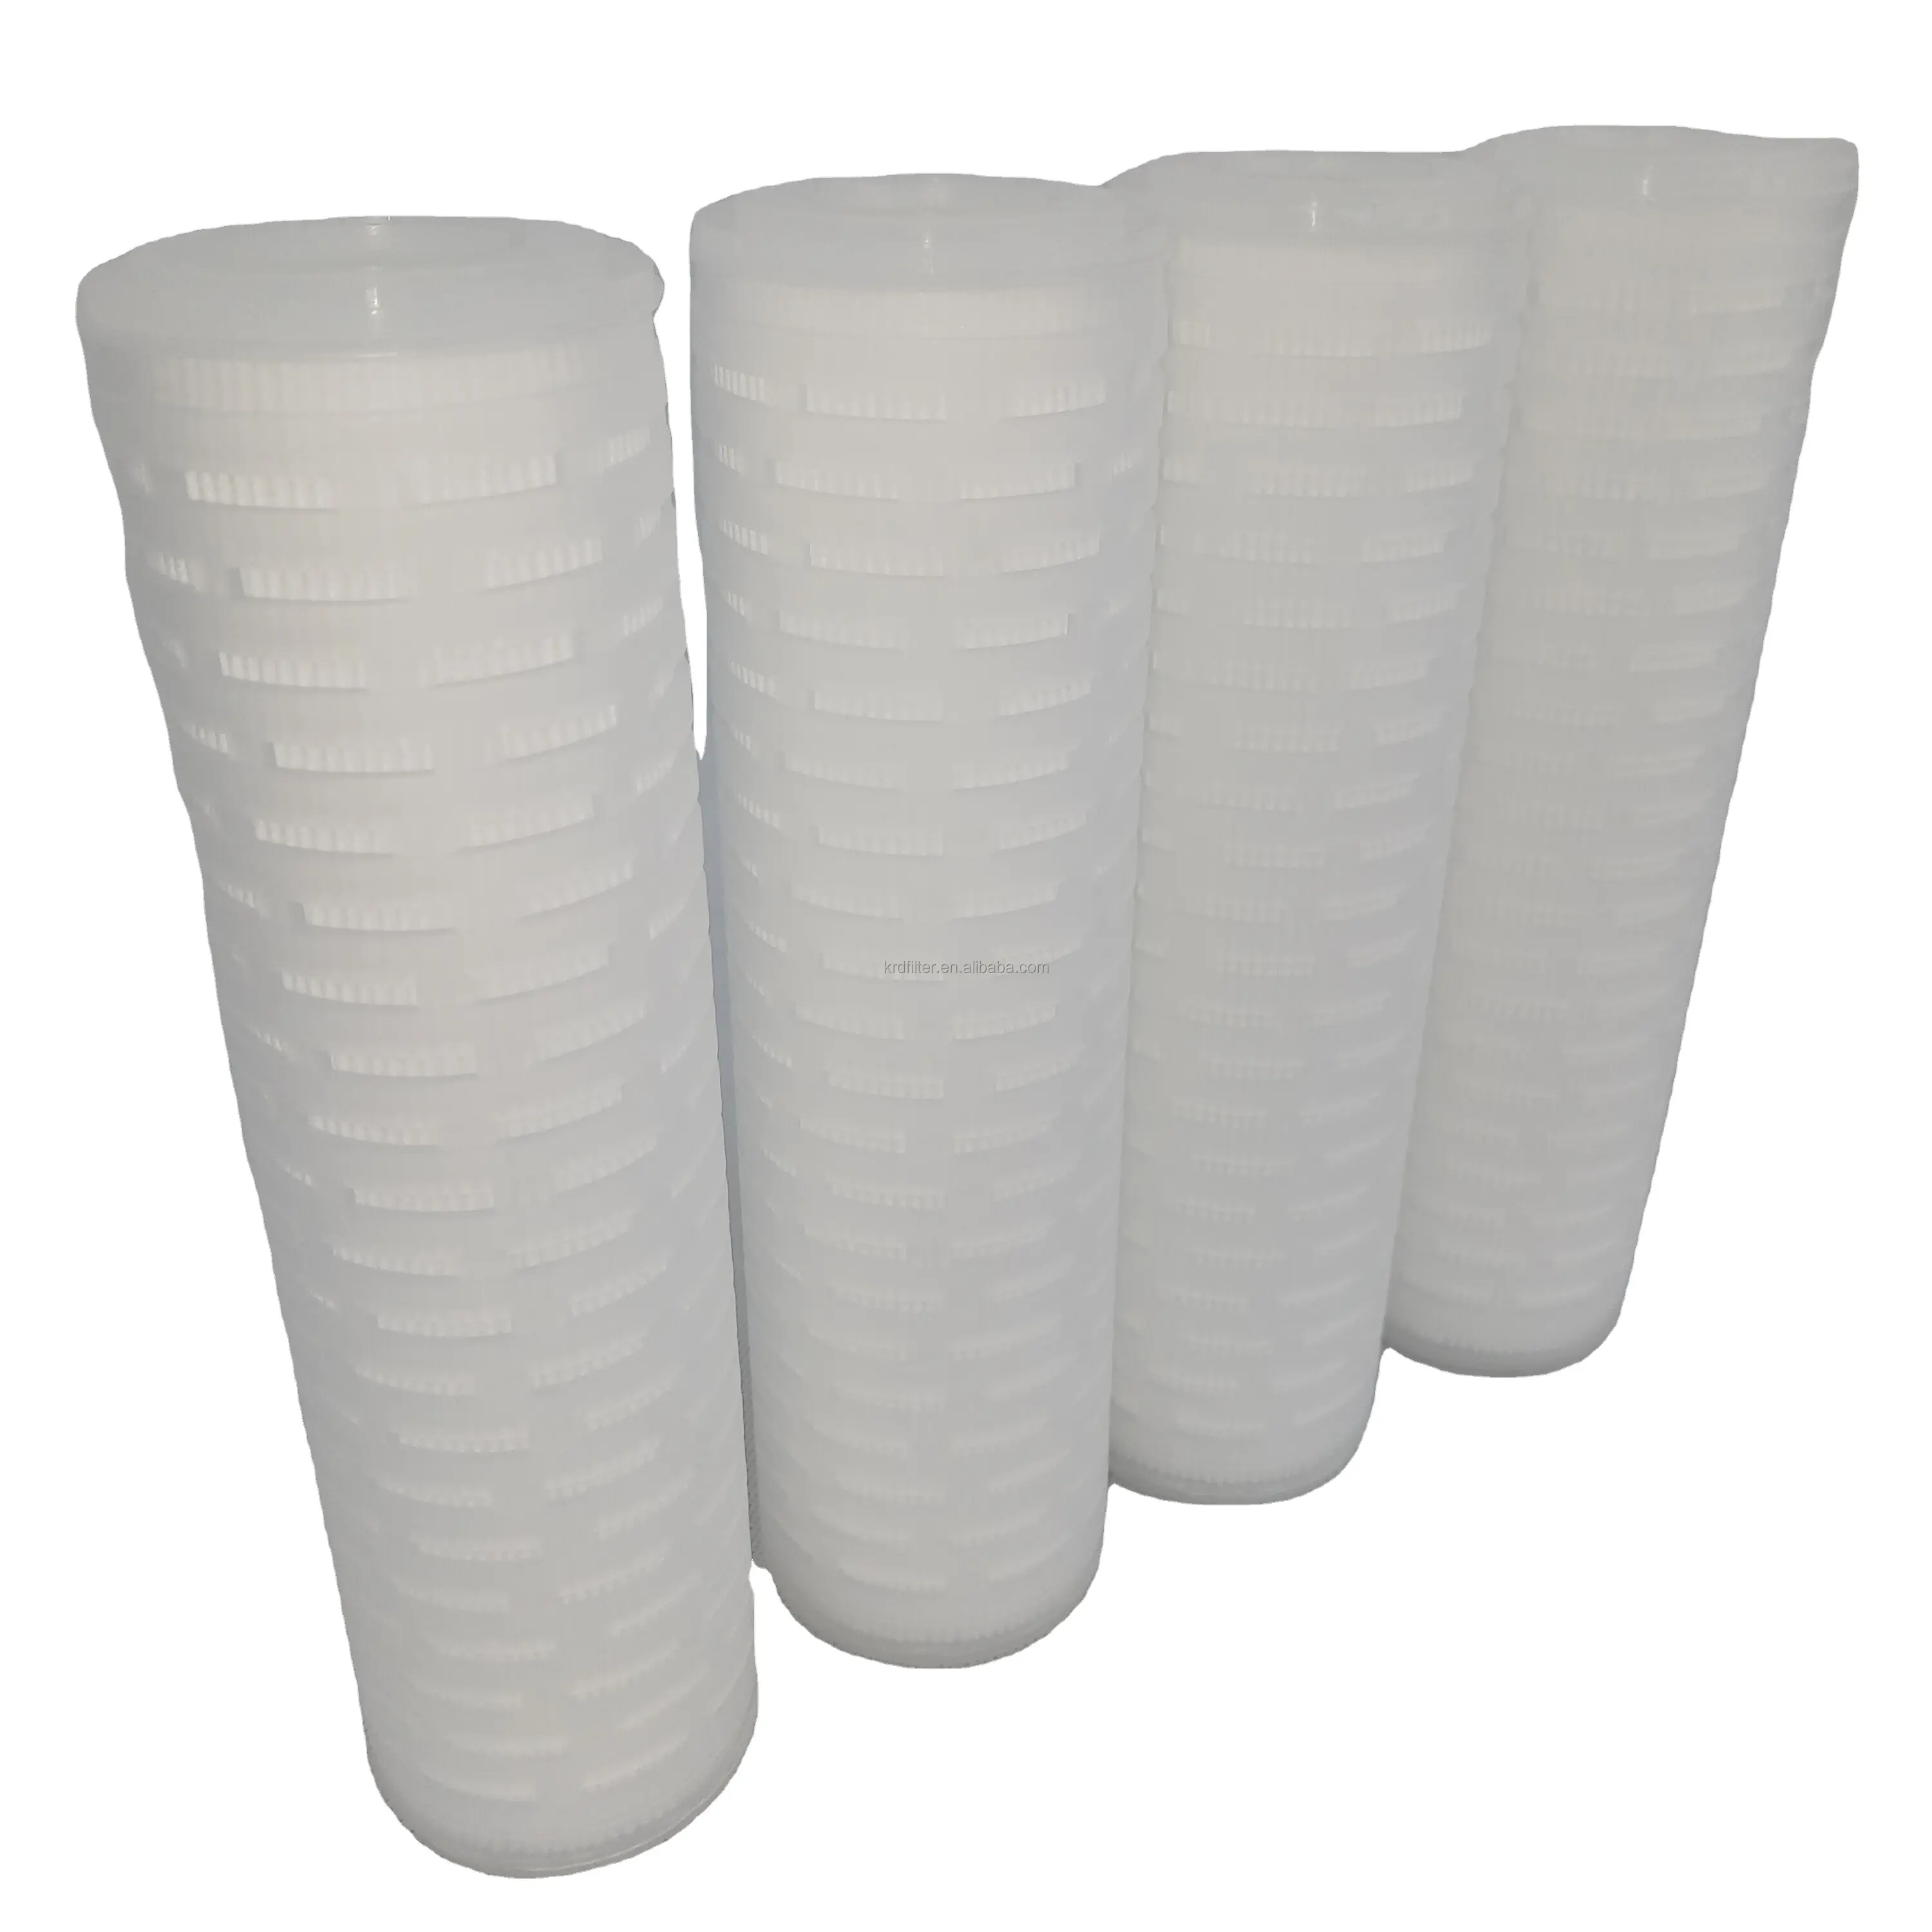 China Supplier Provide Customized Filtration Solutions Large High Flow PP Pleated Water Filter Cartridge